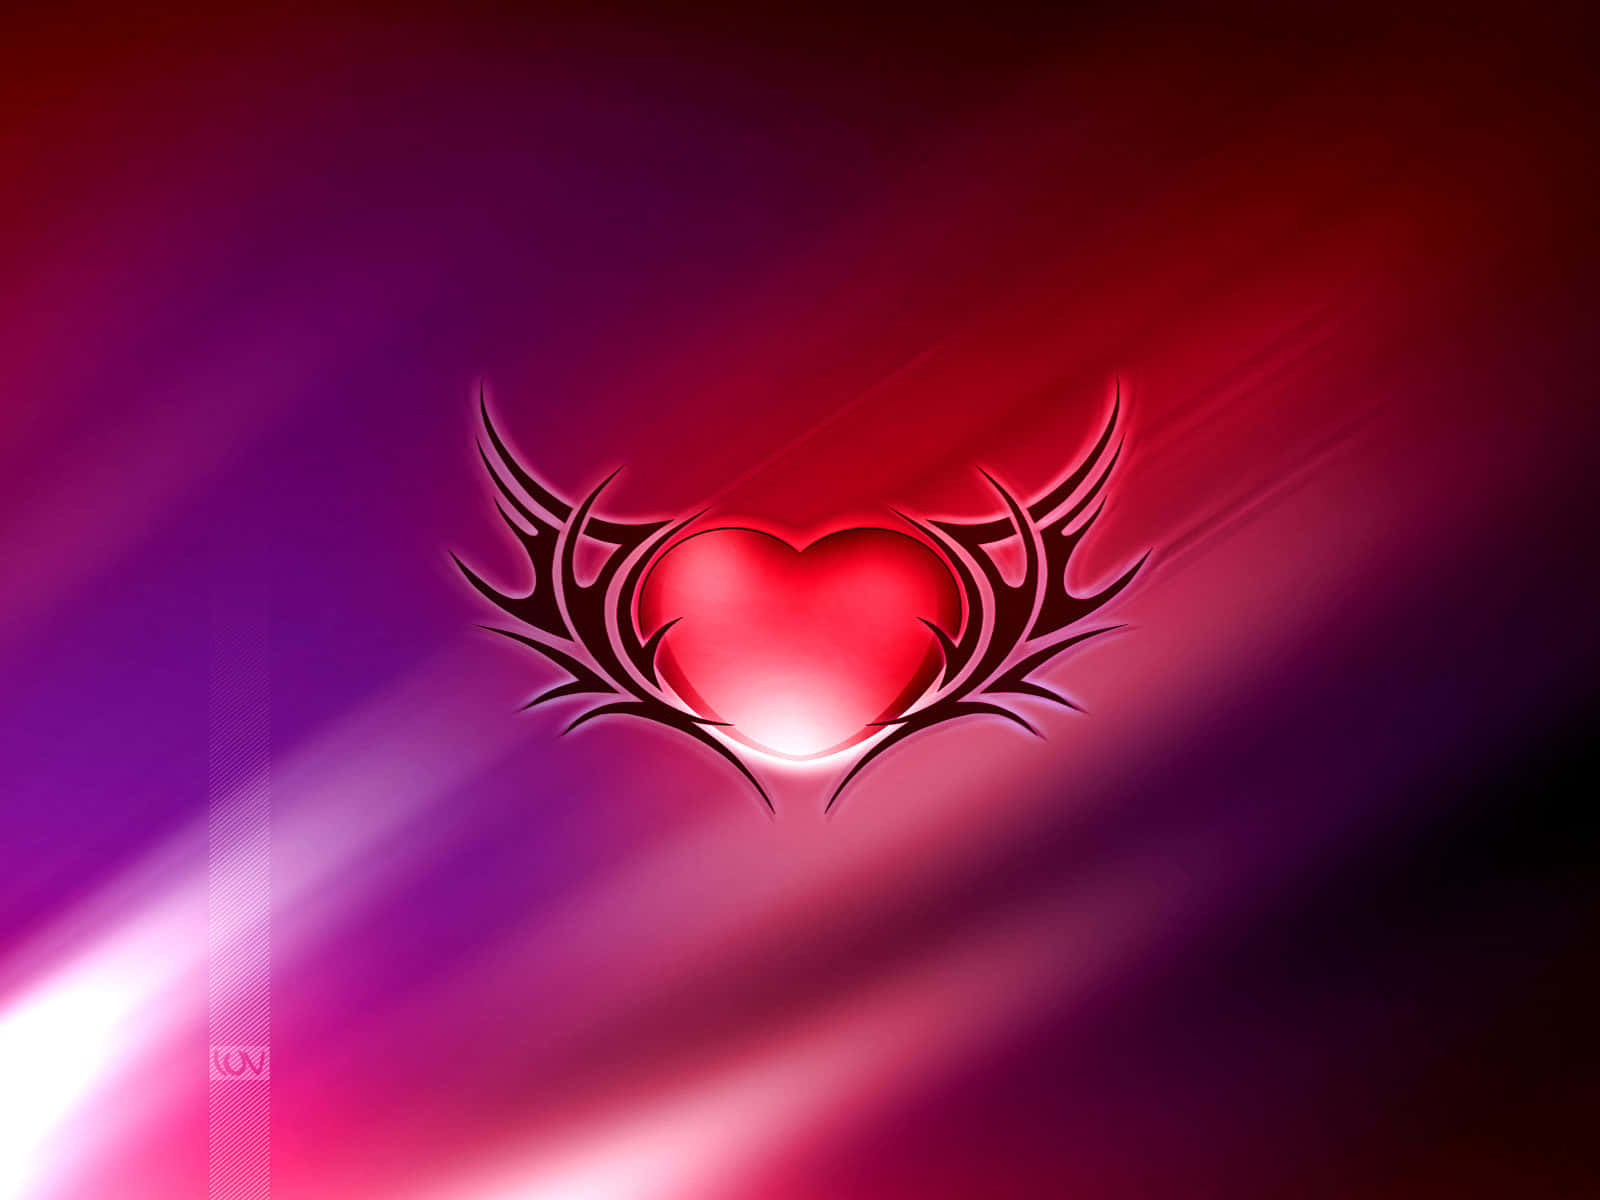 Download Passionate Heart With Wings Wallpaper | Wallpapers.com